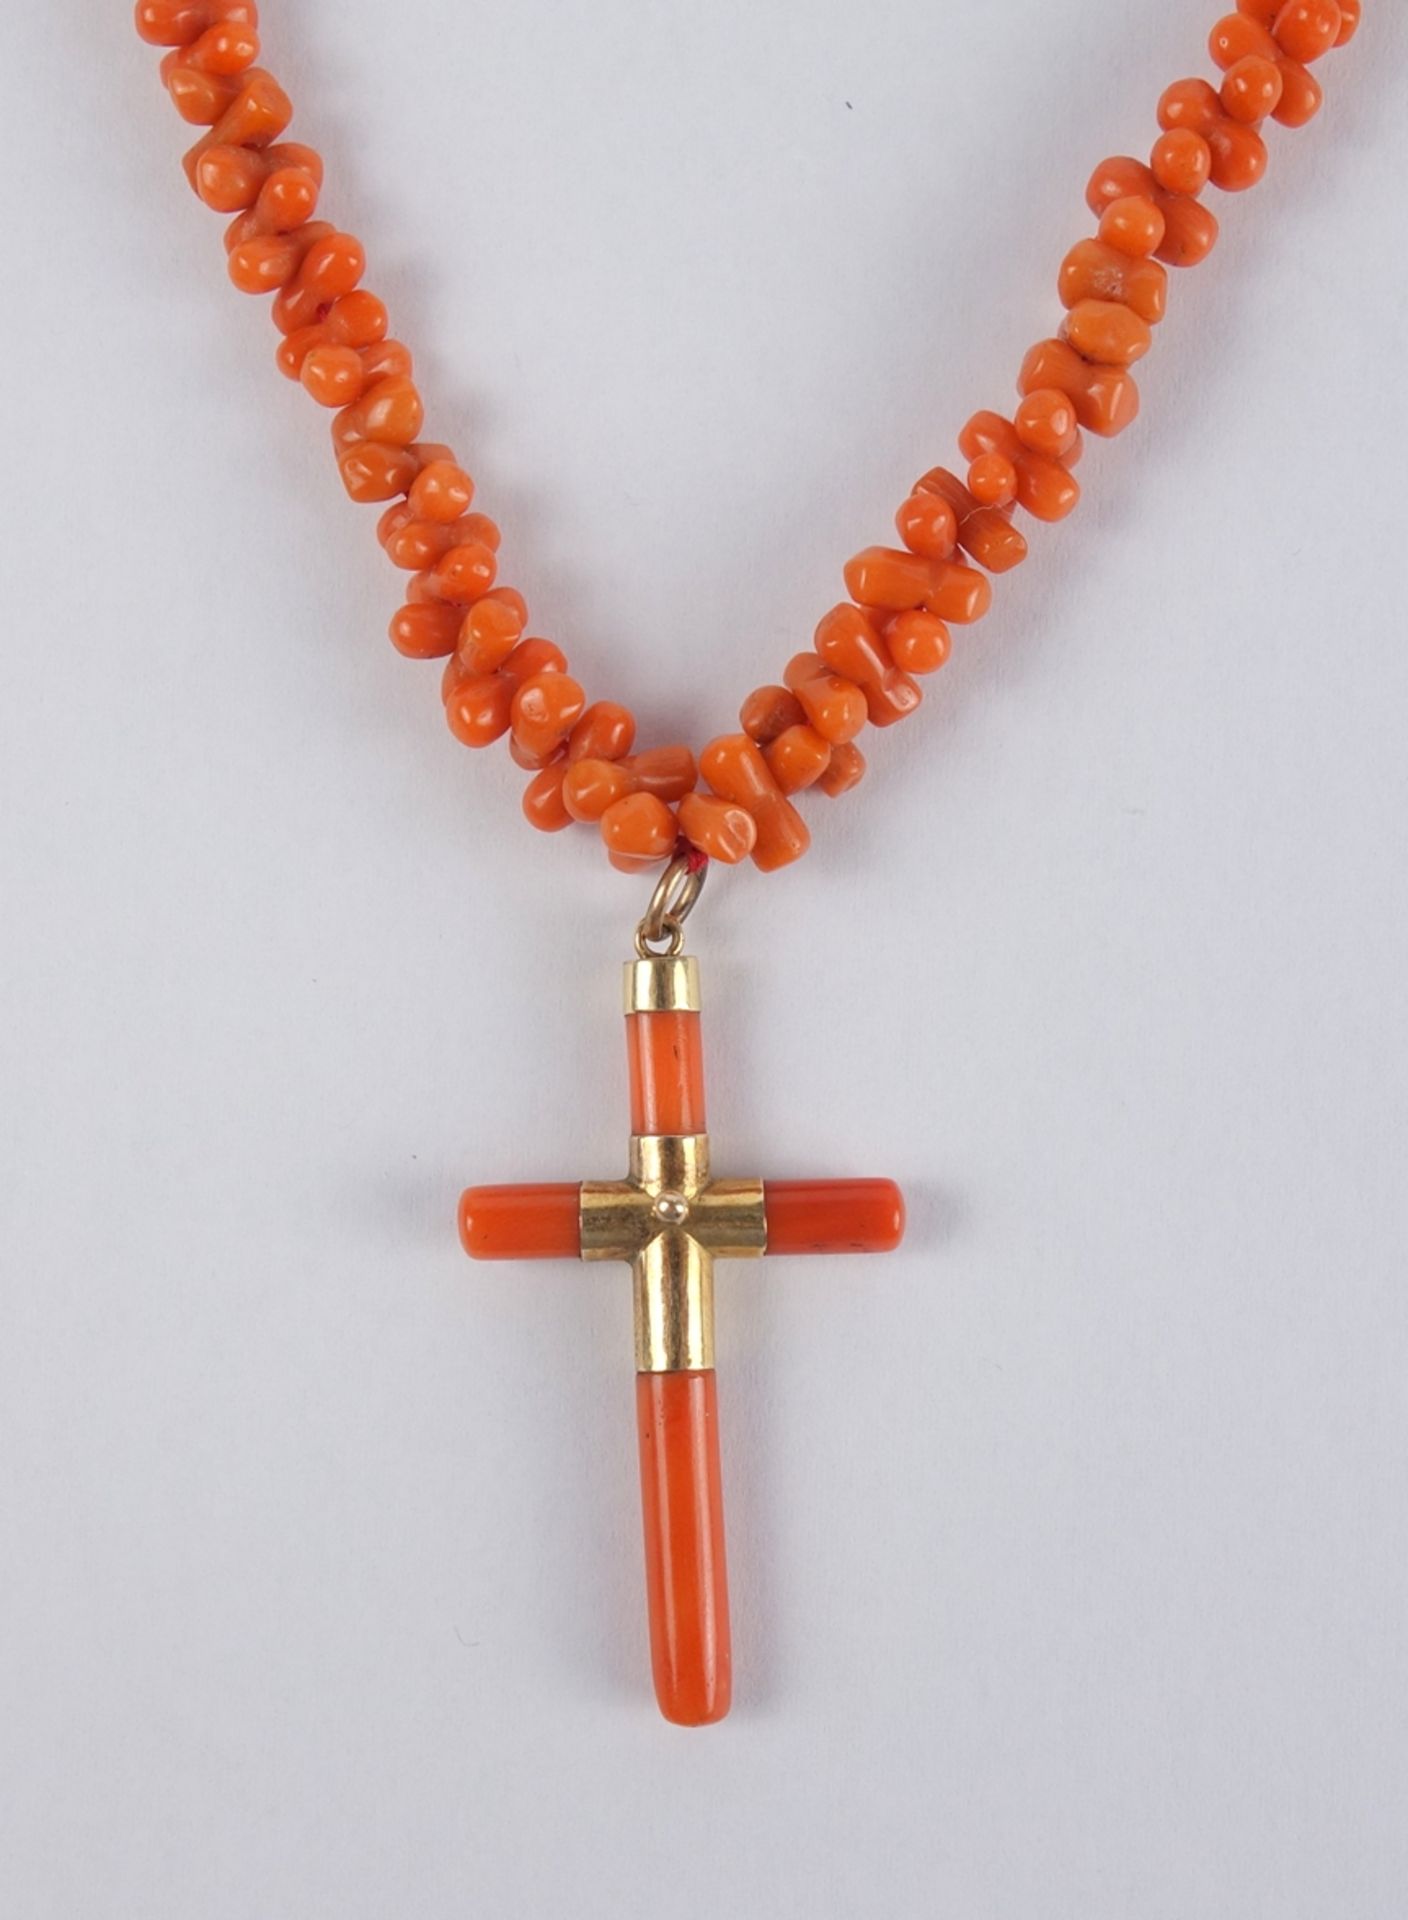 Coral necklace with coral cross pendant, around 1920